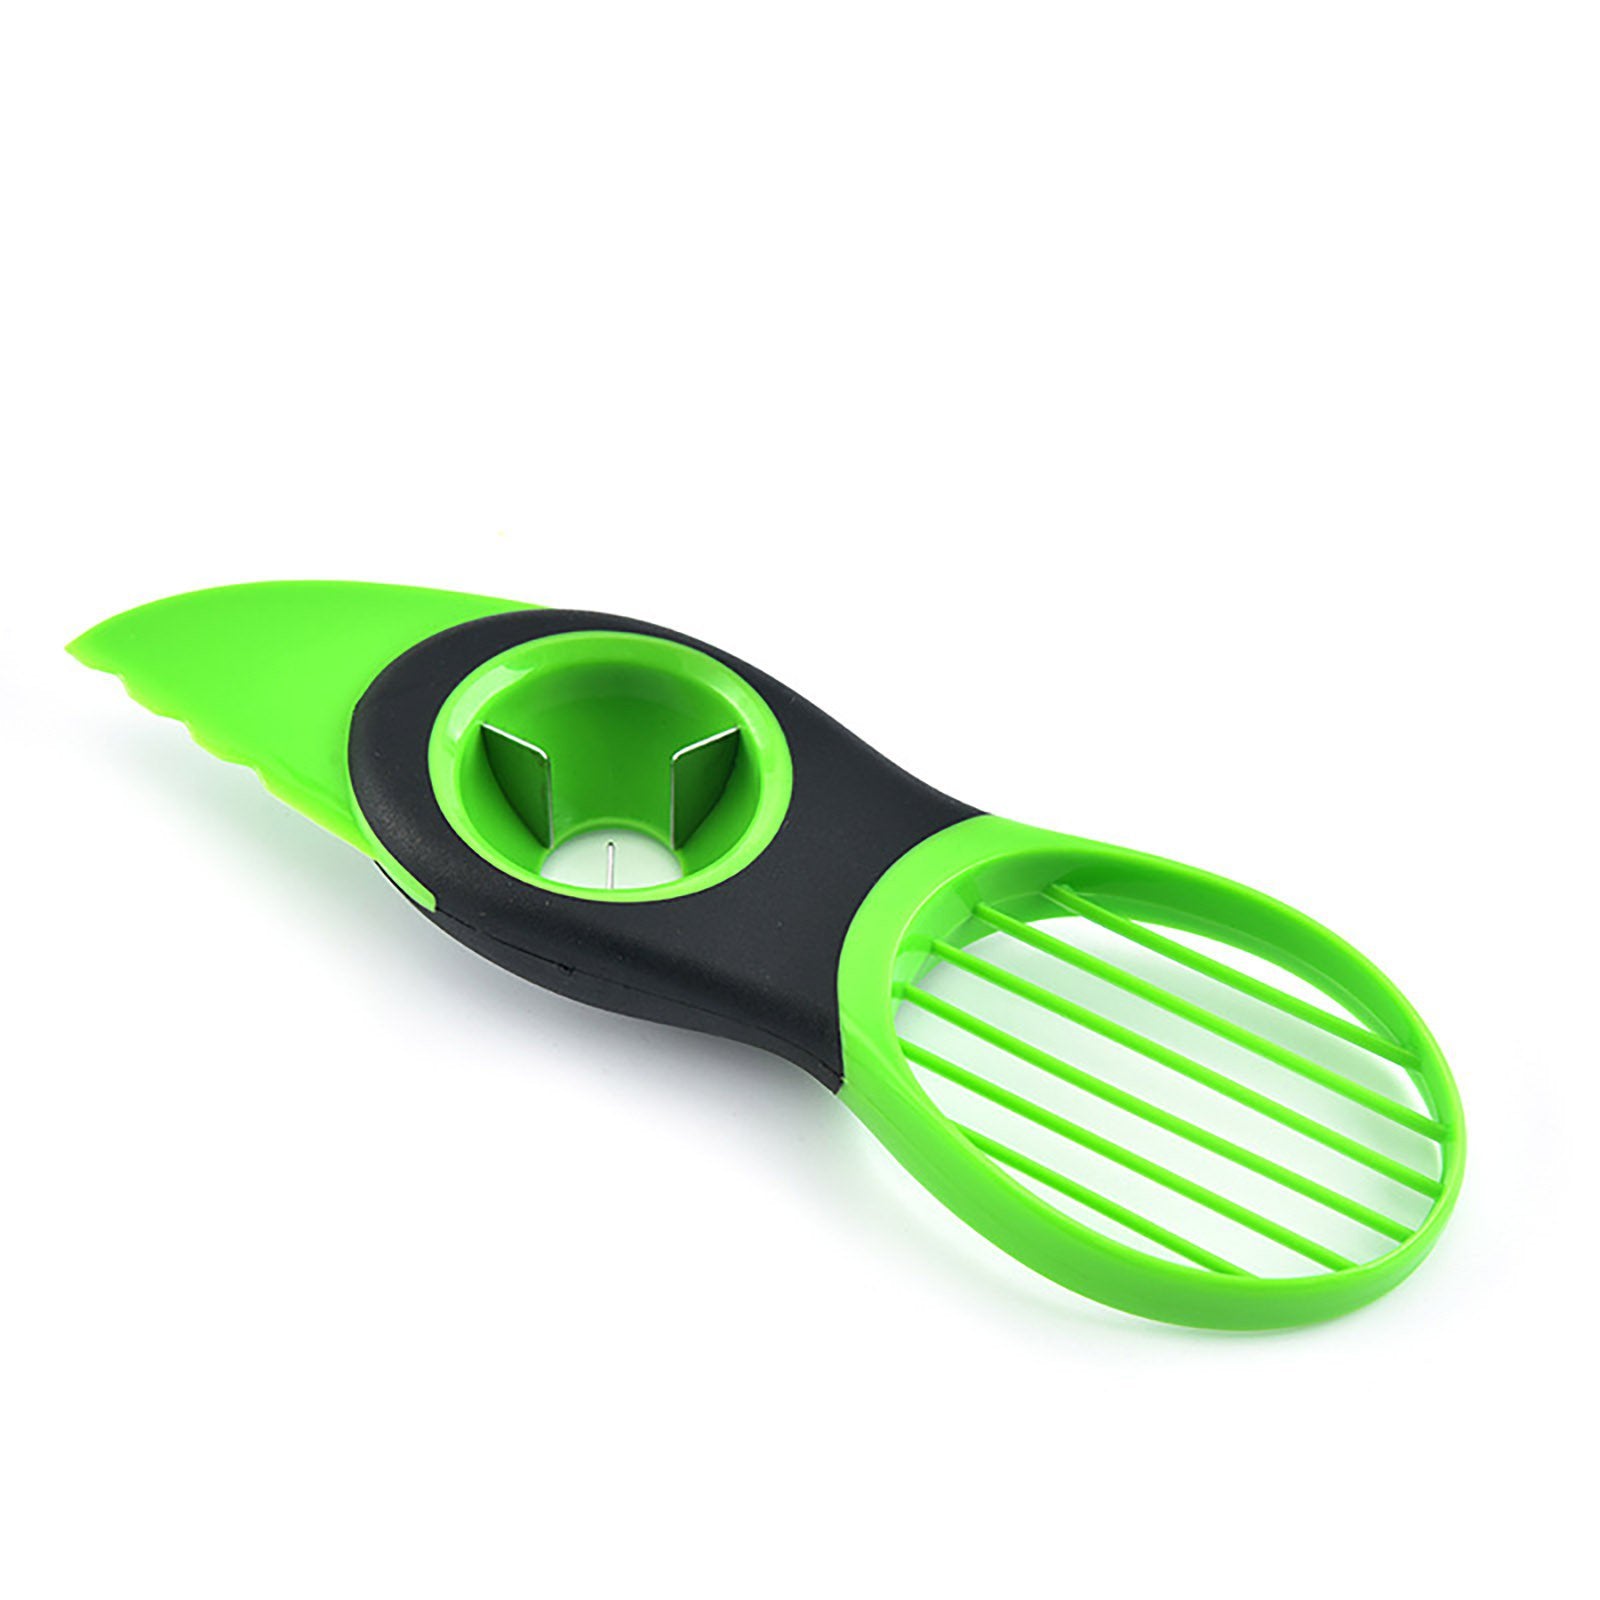 Stainless 3 in 1 Avocado Cutter, 12 cirr - Cook on Bay